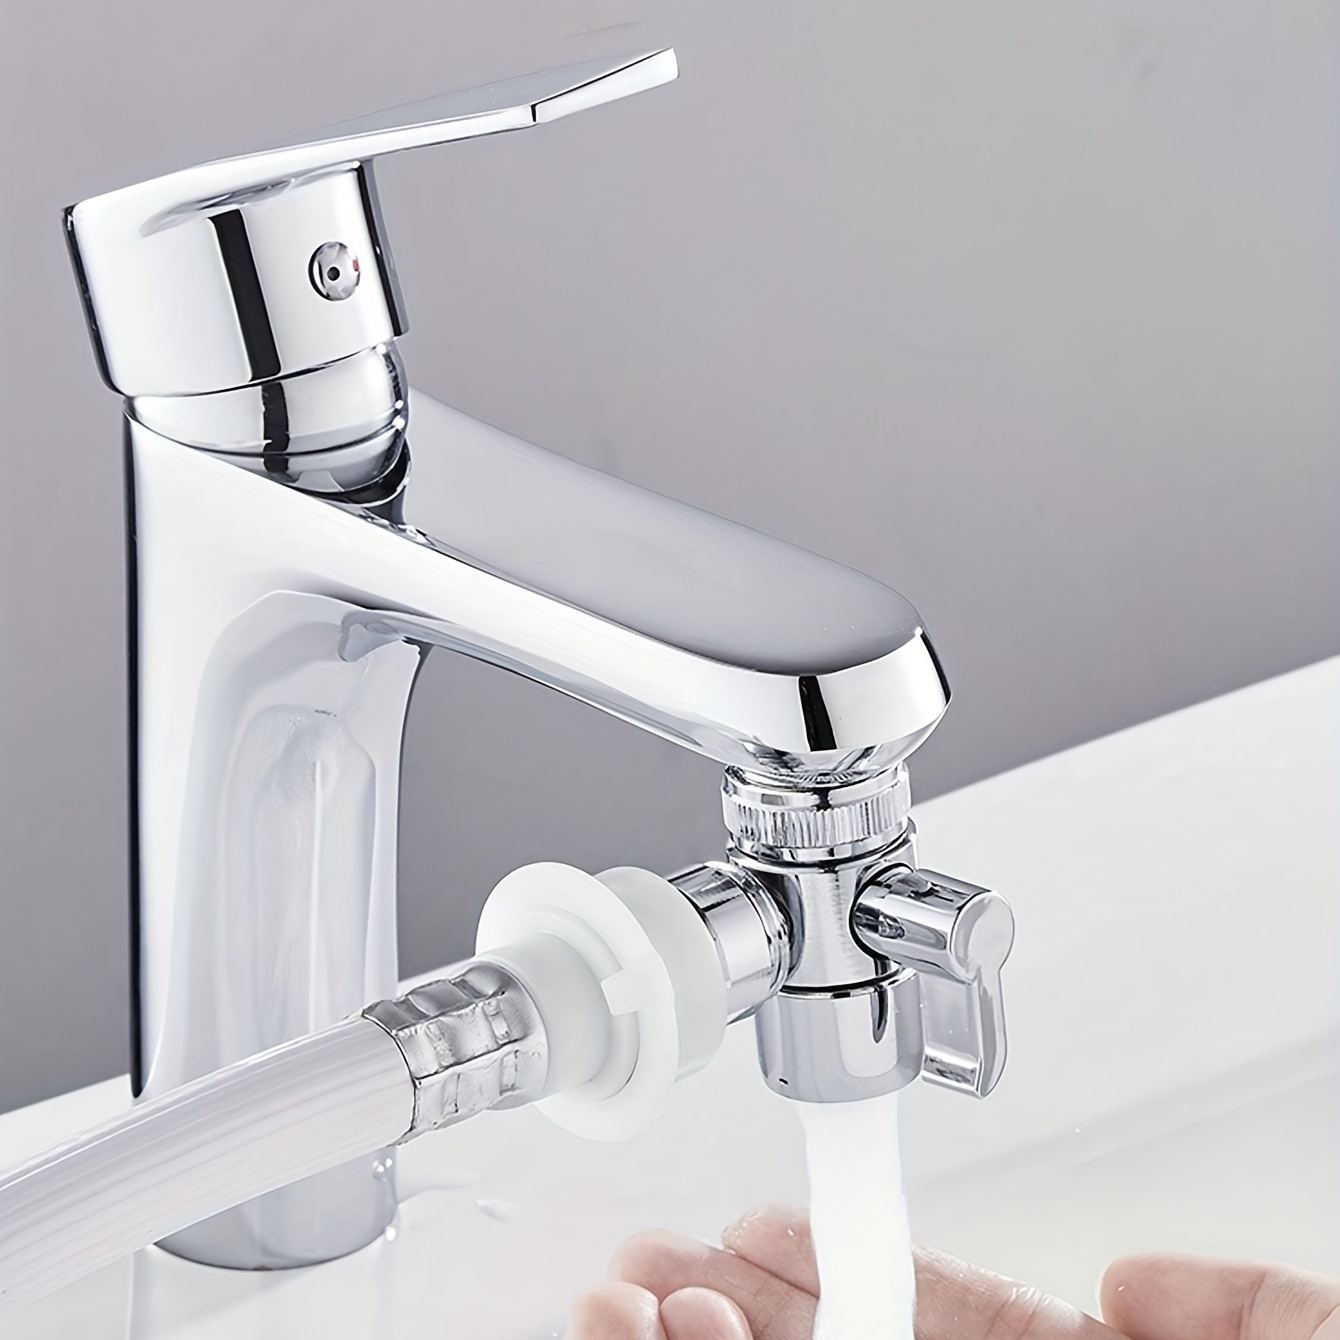 

Upgrade Your Sink With This Universal Swivel Faucet Extender - 1080° Rotating, Splashproof, And 2 Spout Modes!